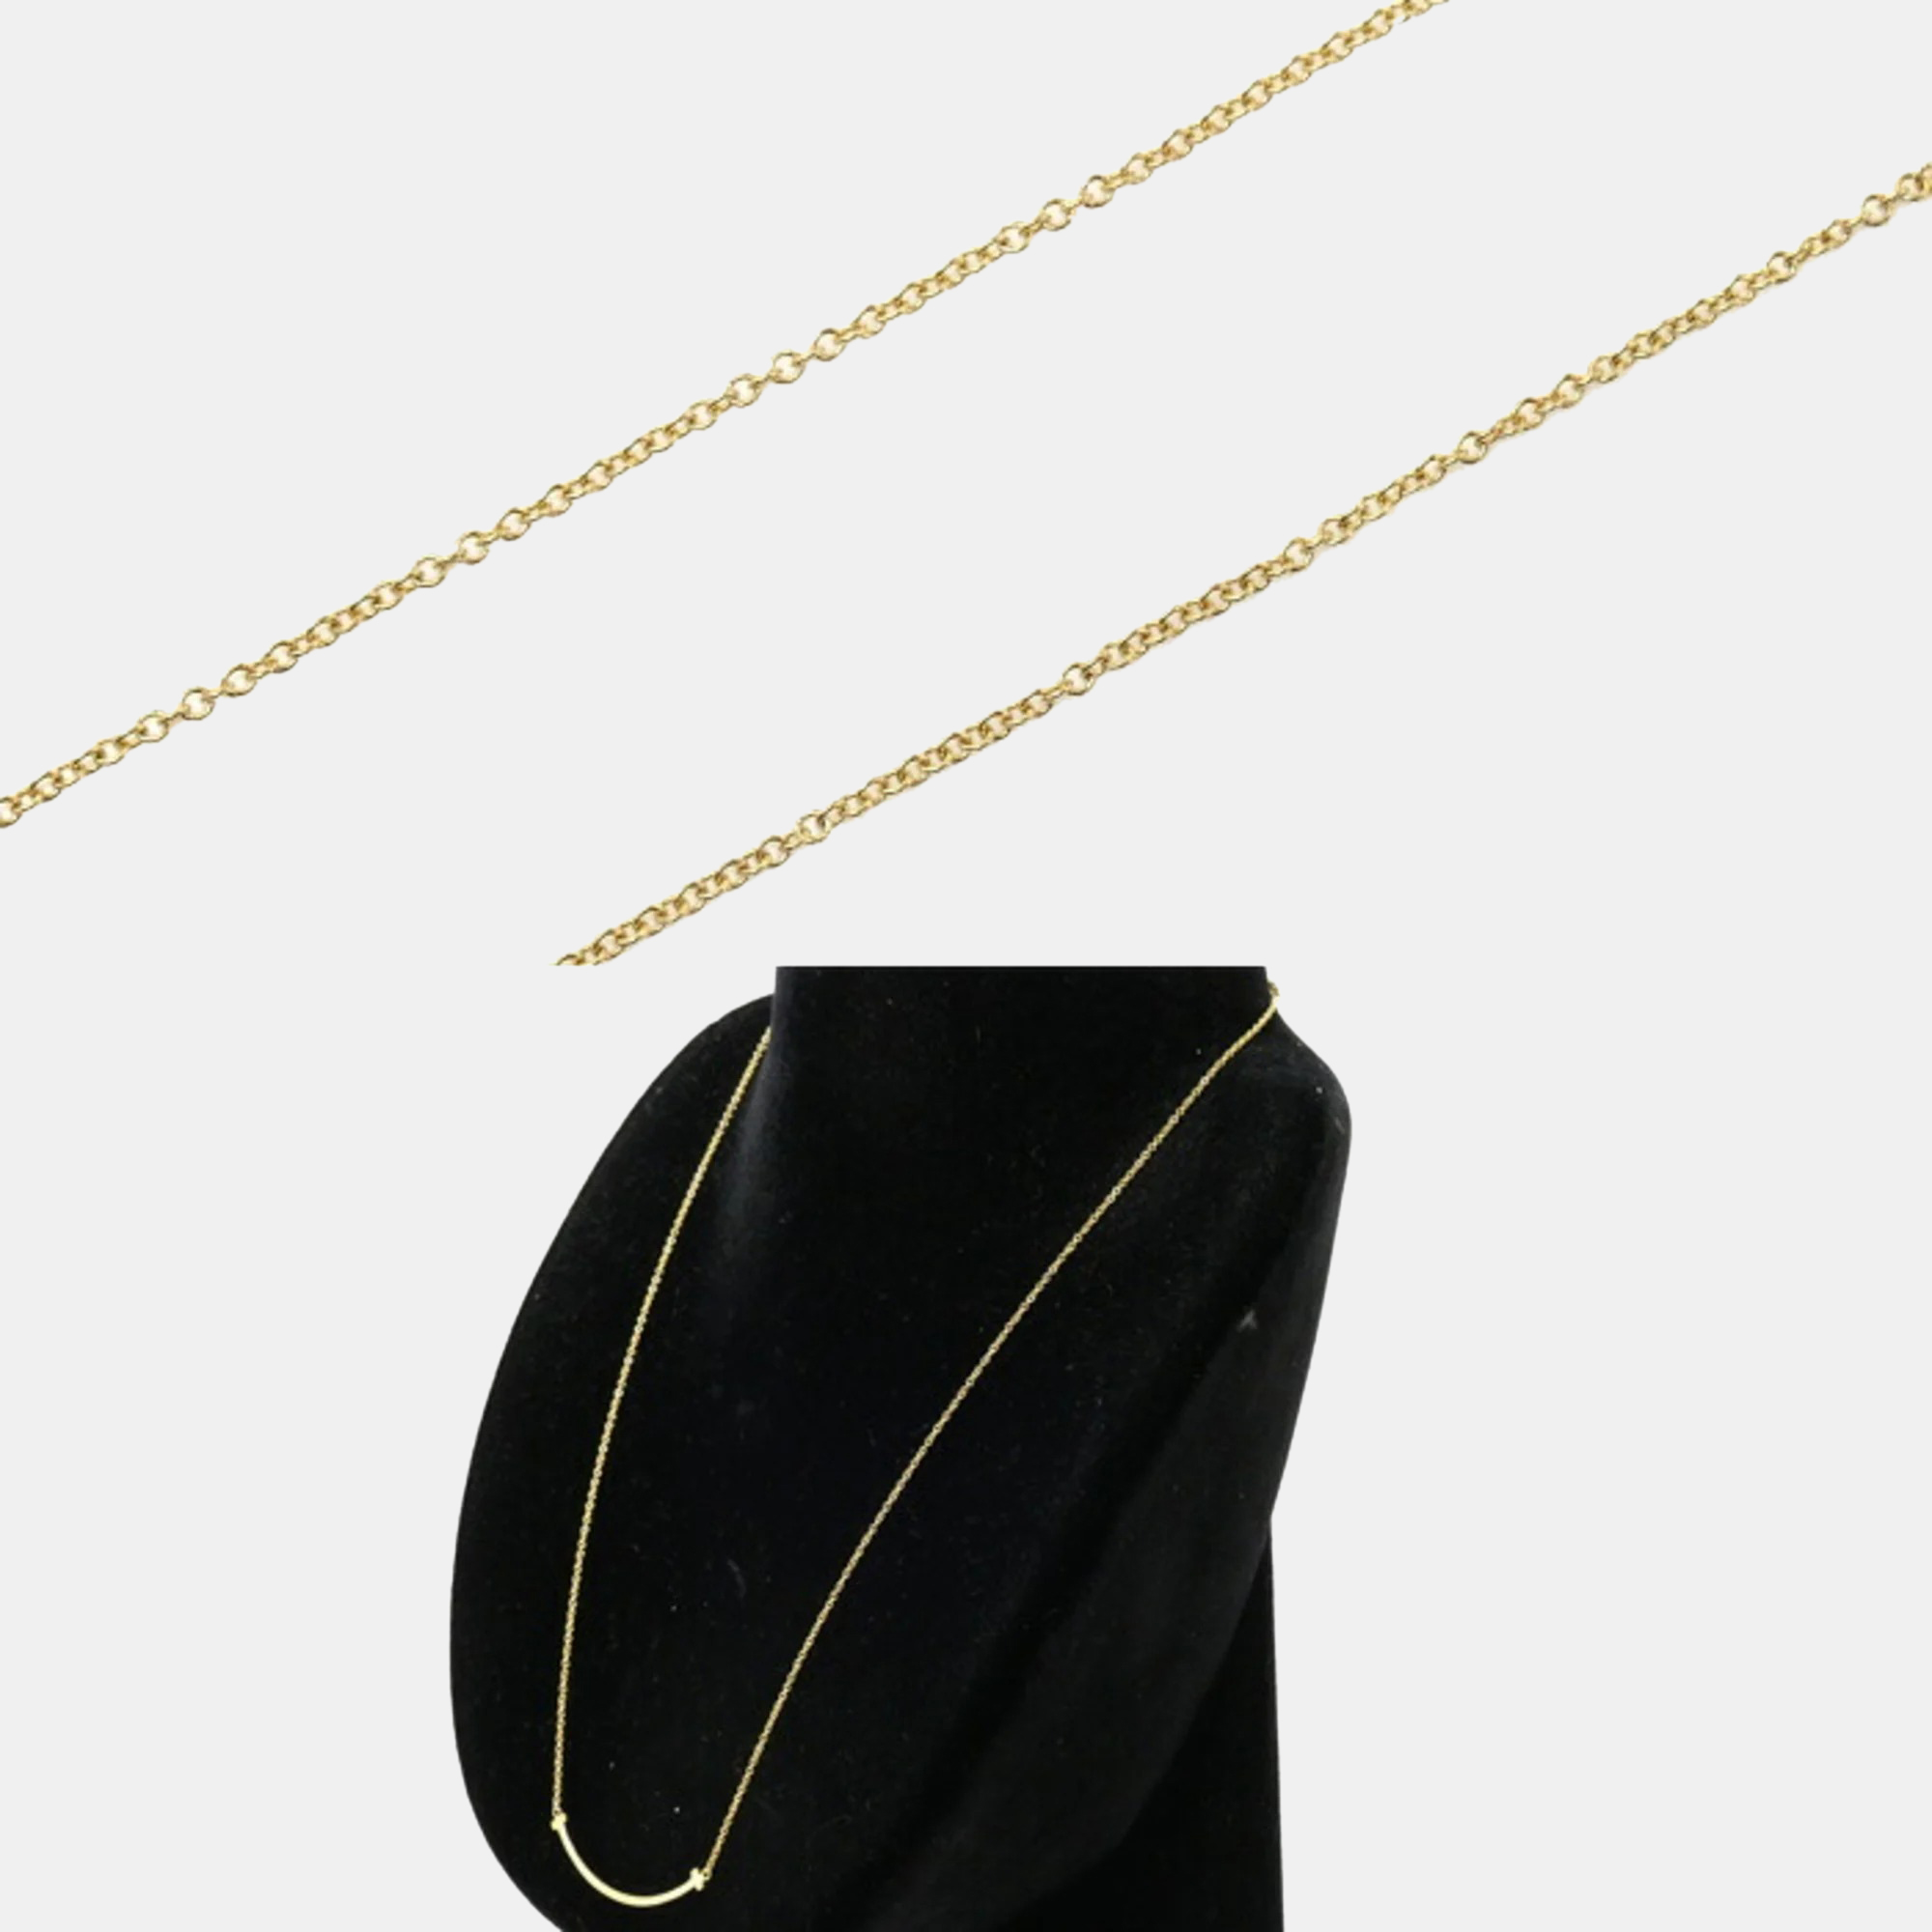 Tiffany & Co. 18K Yellow Gold T Smile Pendant Necklace